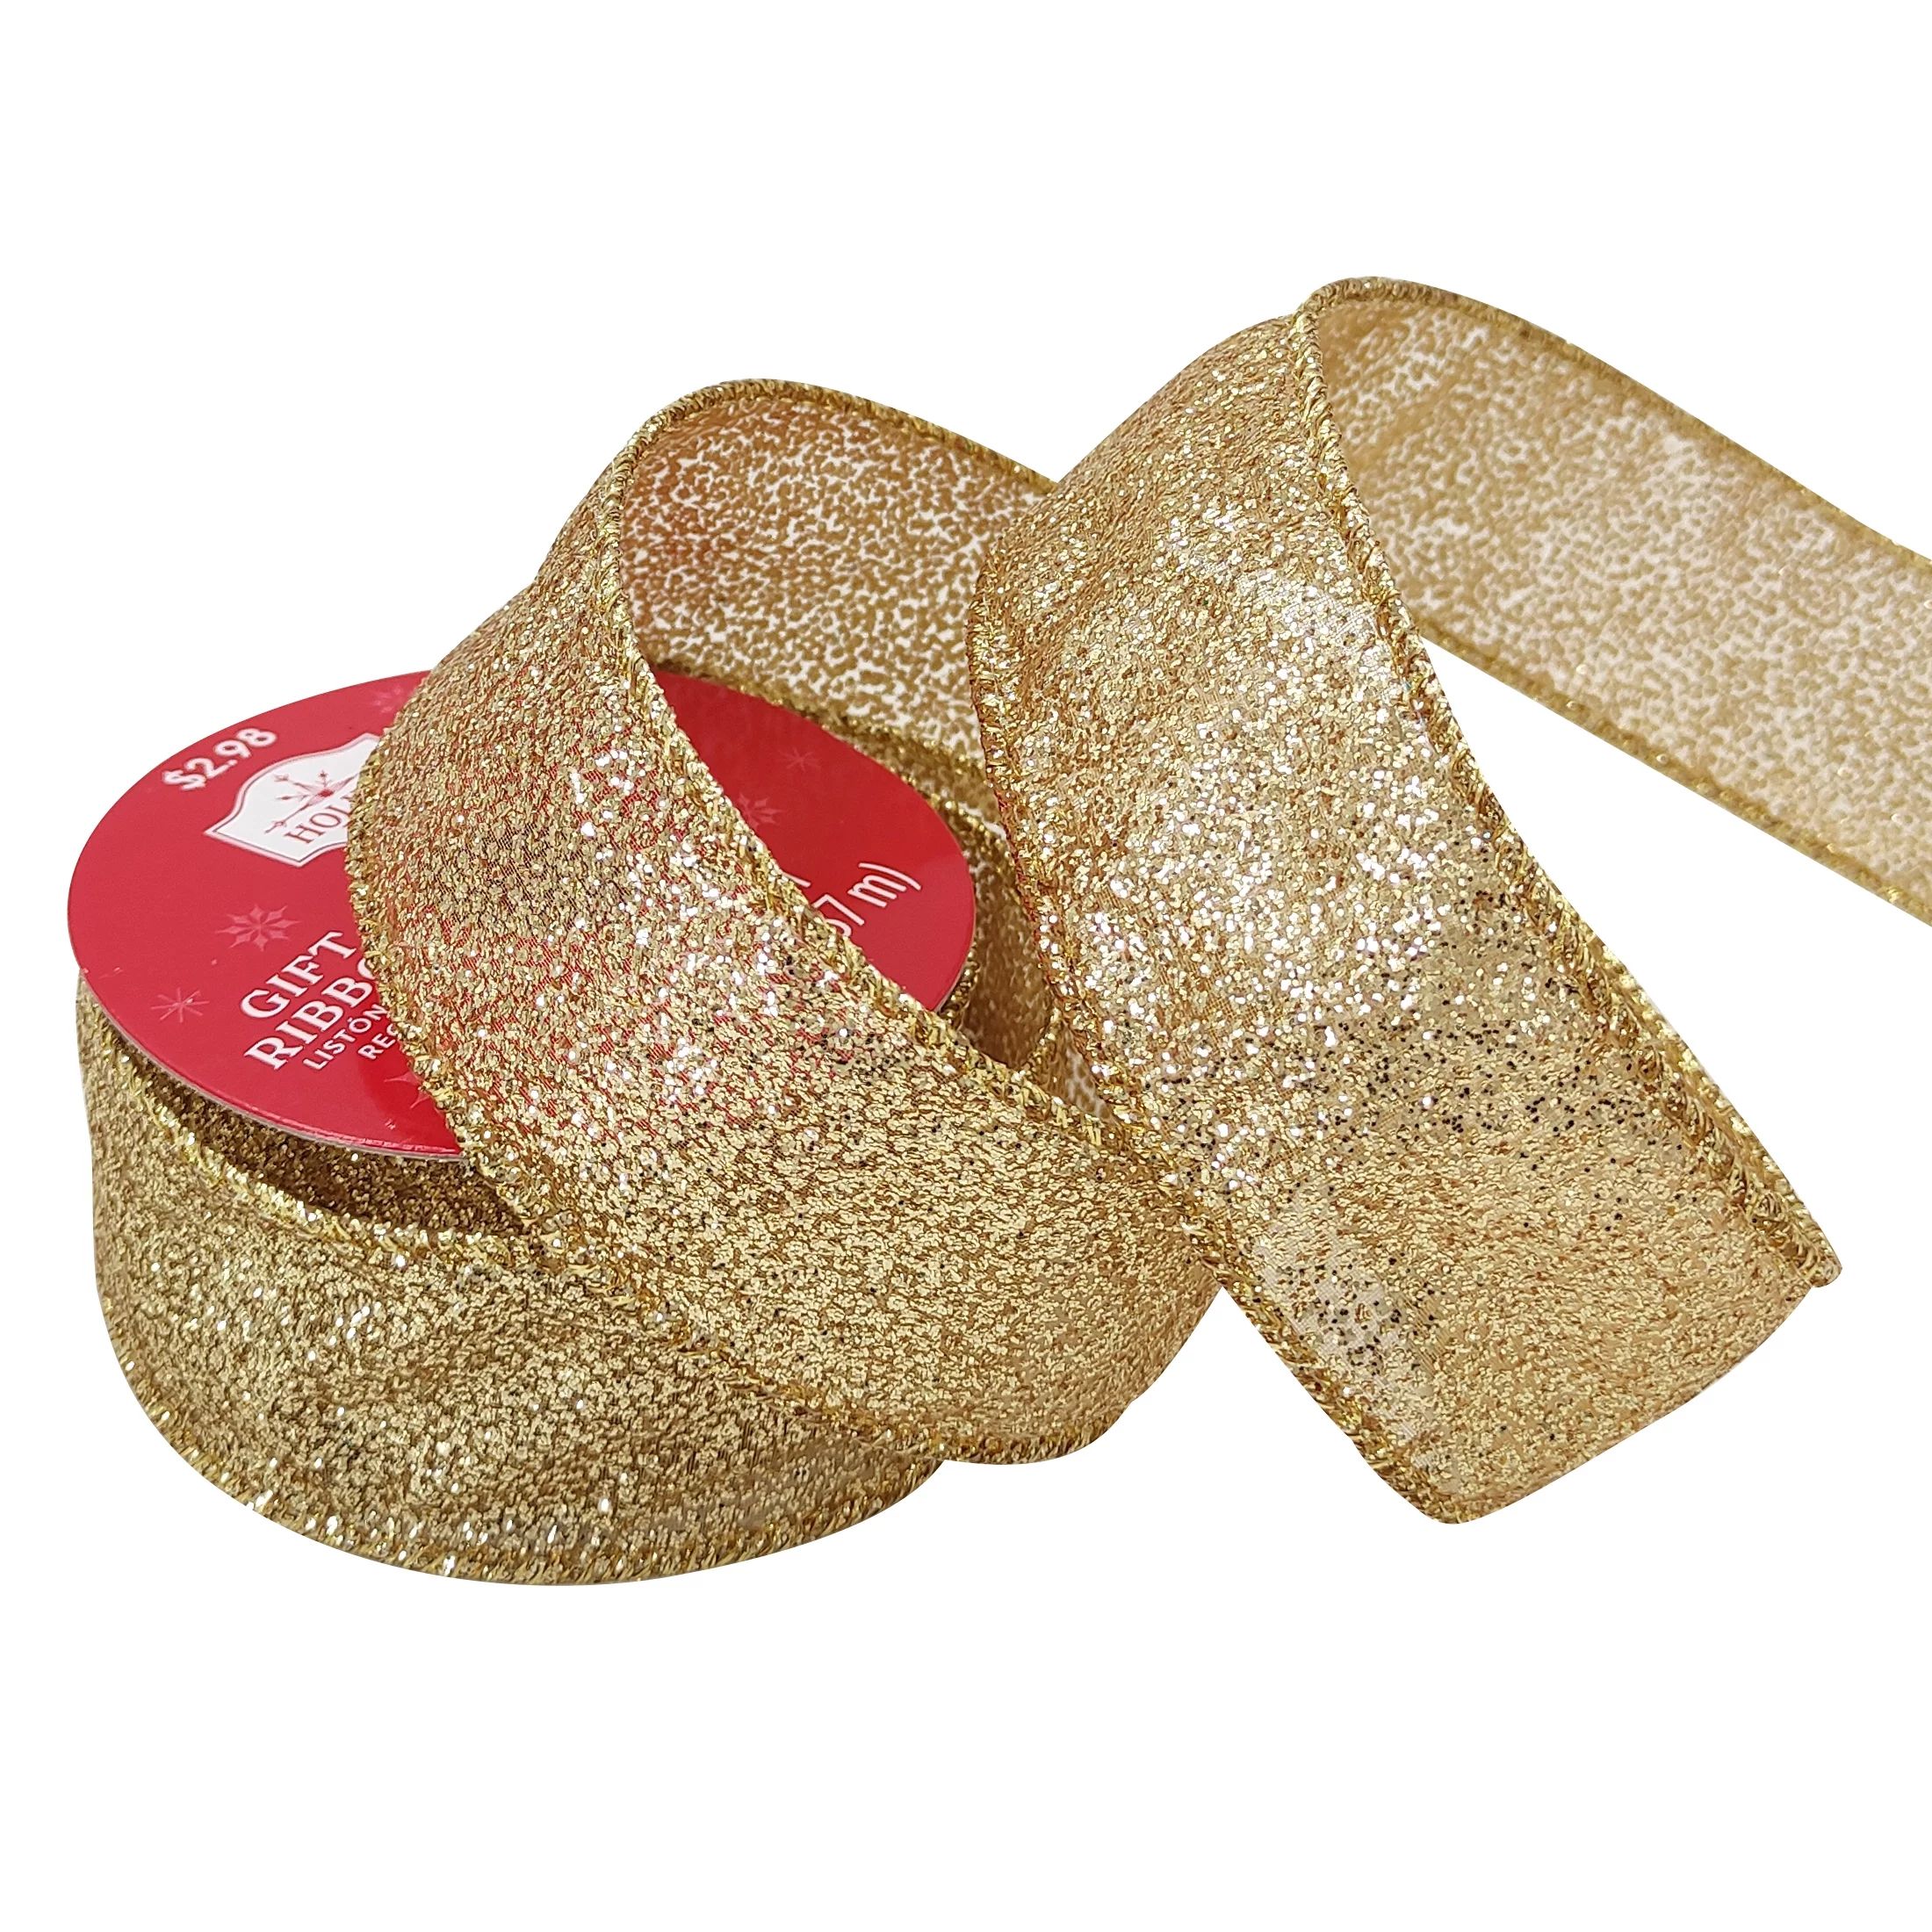 Wired Edge Gift Wrap Fabric Ribbon, Gold Metallic Glitter with Sewn Edge, 1.5 in x 15 ft, by Holi... | Walmart (US)